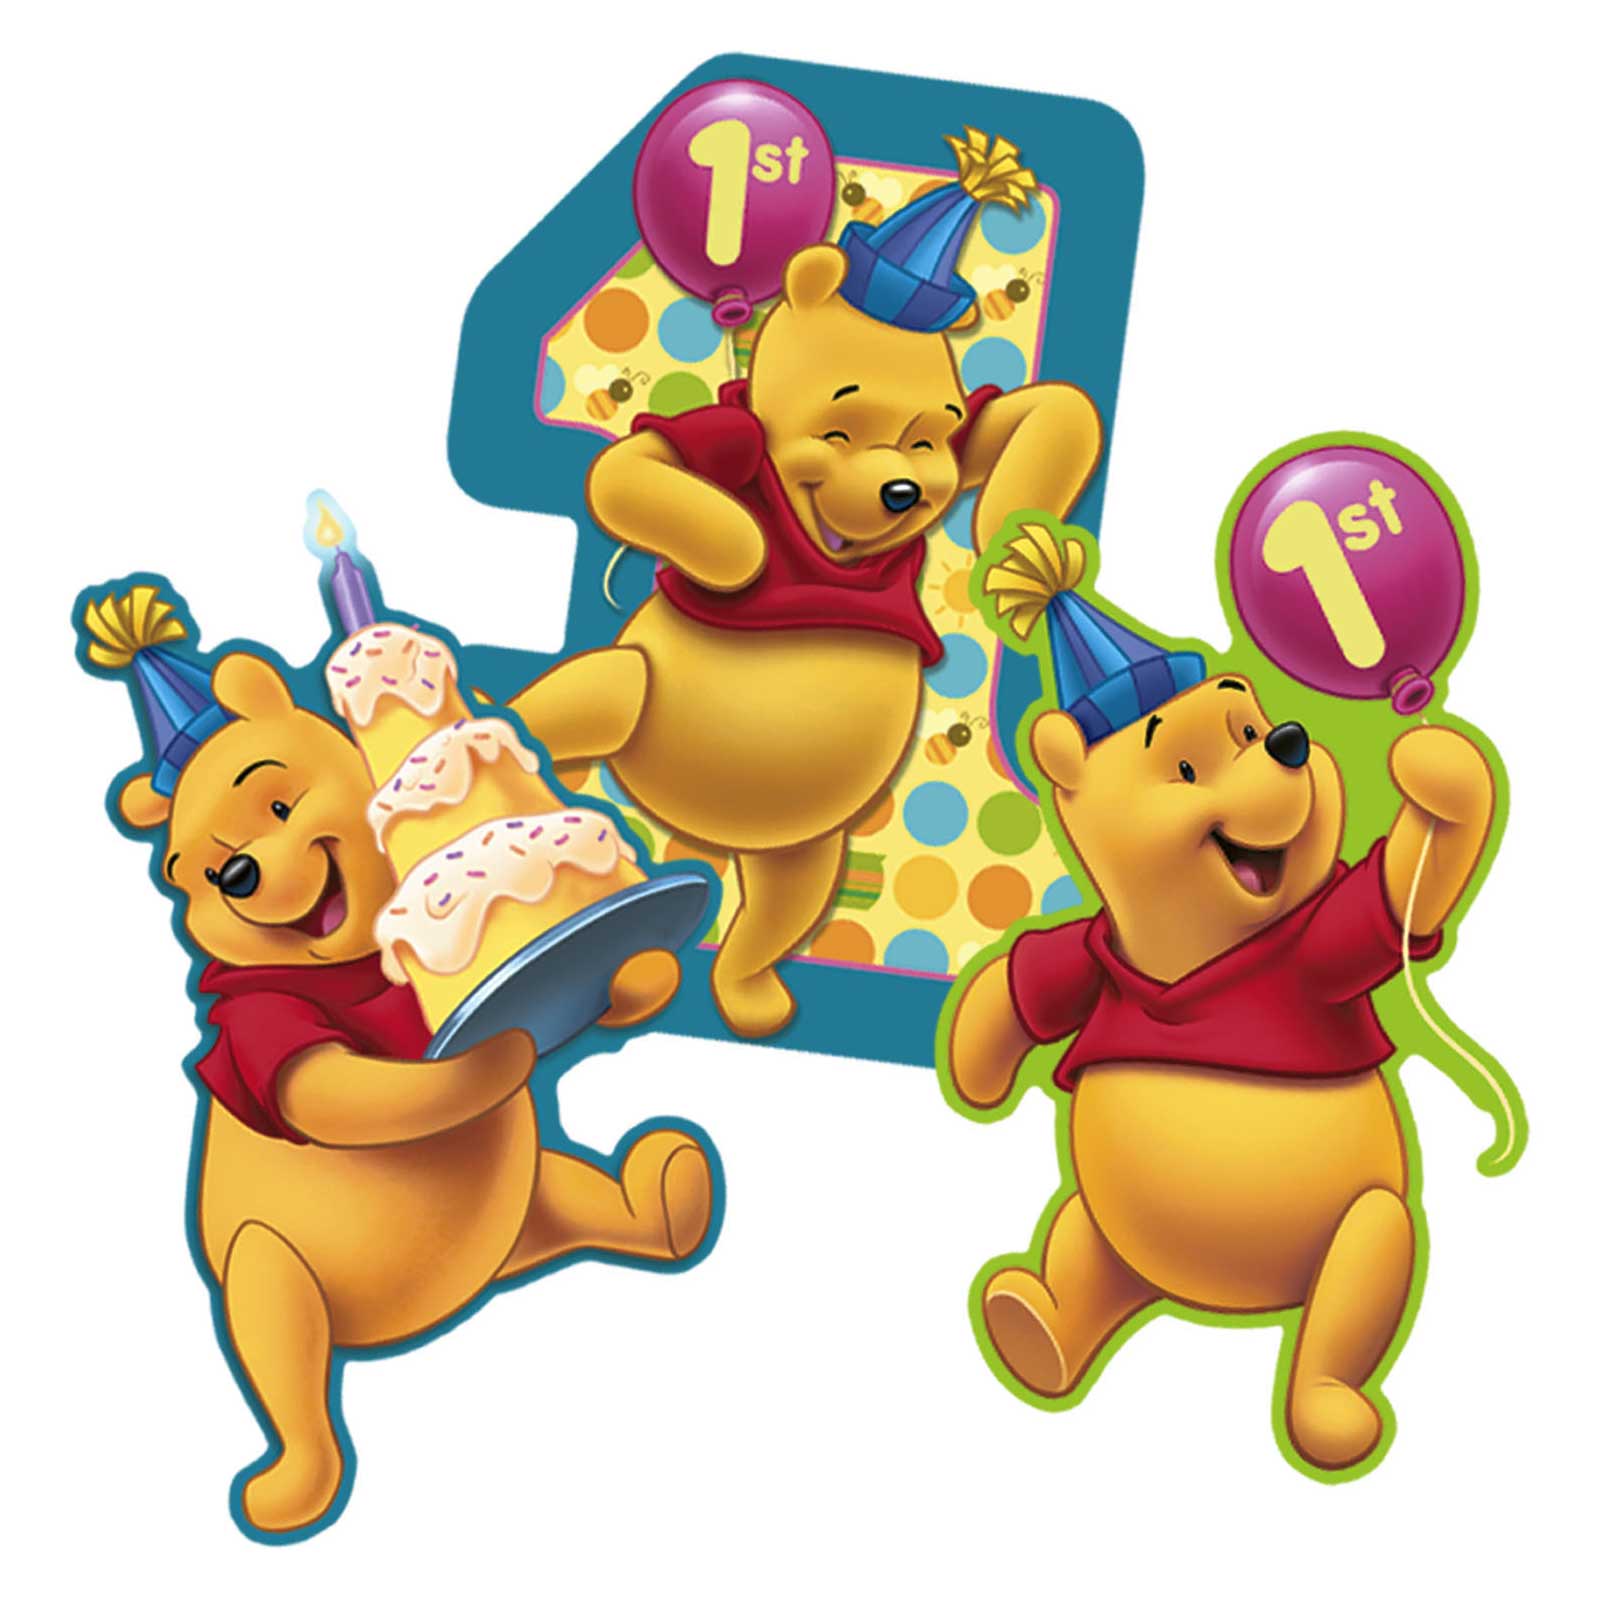 Pooh's 1st Birthday Wall Decorations 3pcs Decorations - Party Centre